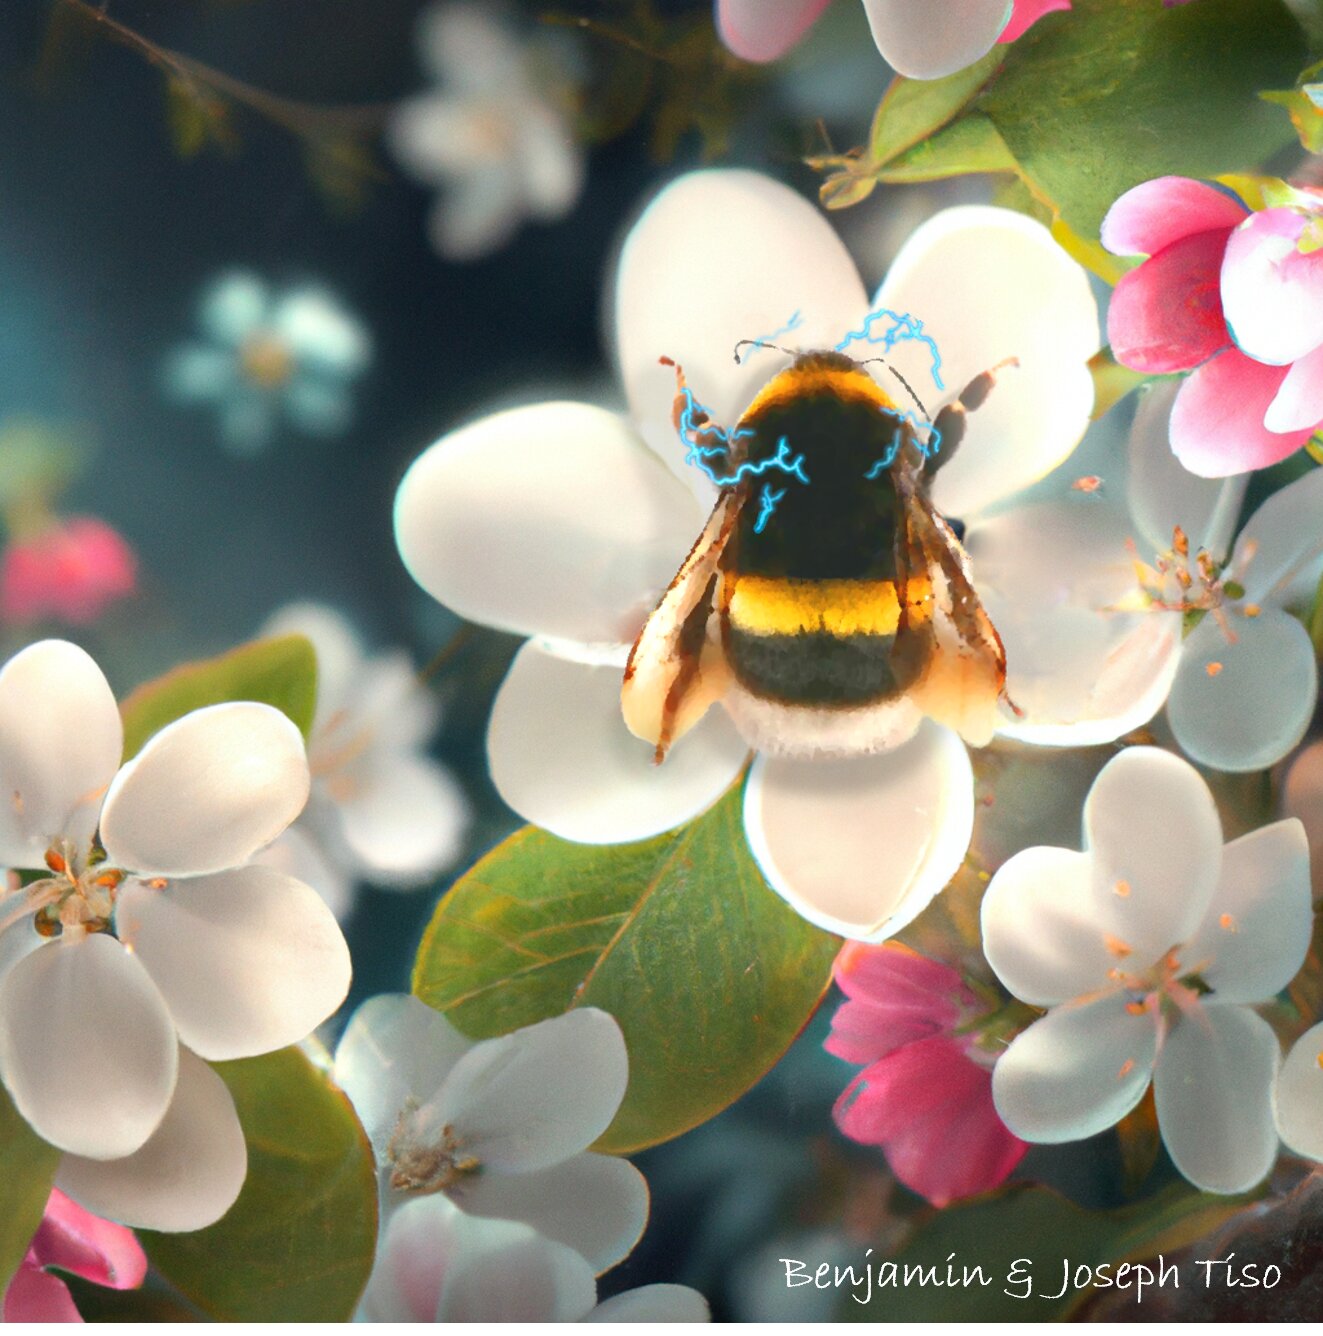 #Fertilizers limit pollination by changing how bumblebees sense flowers